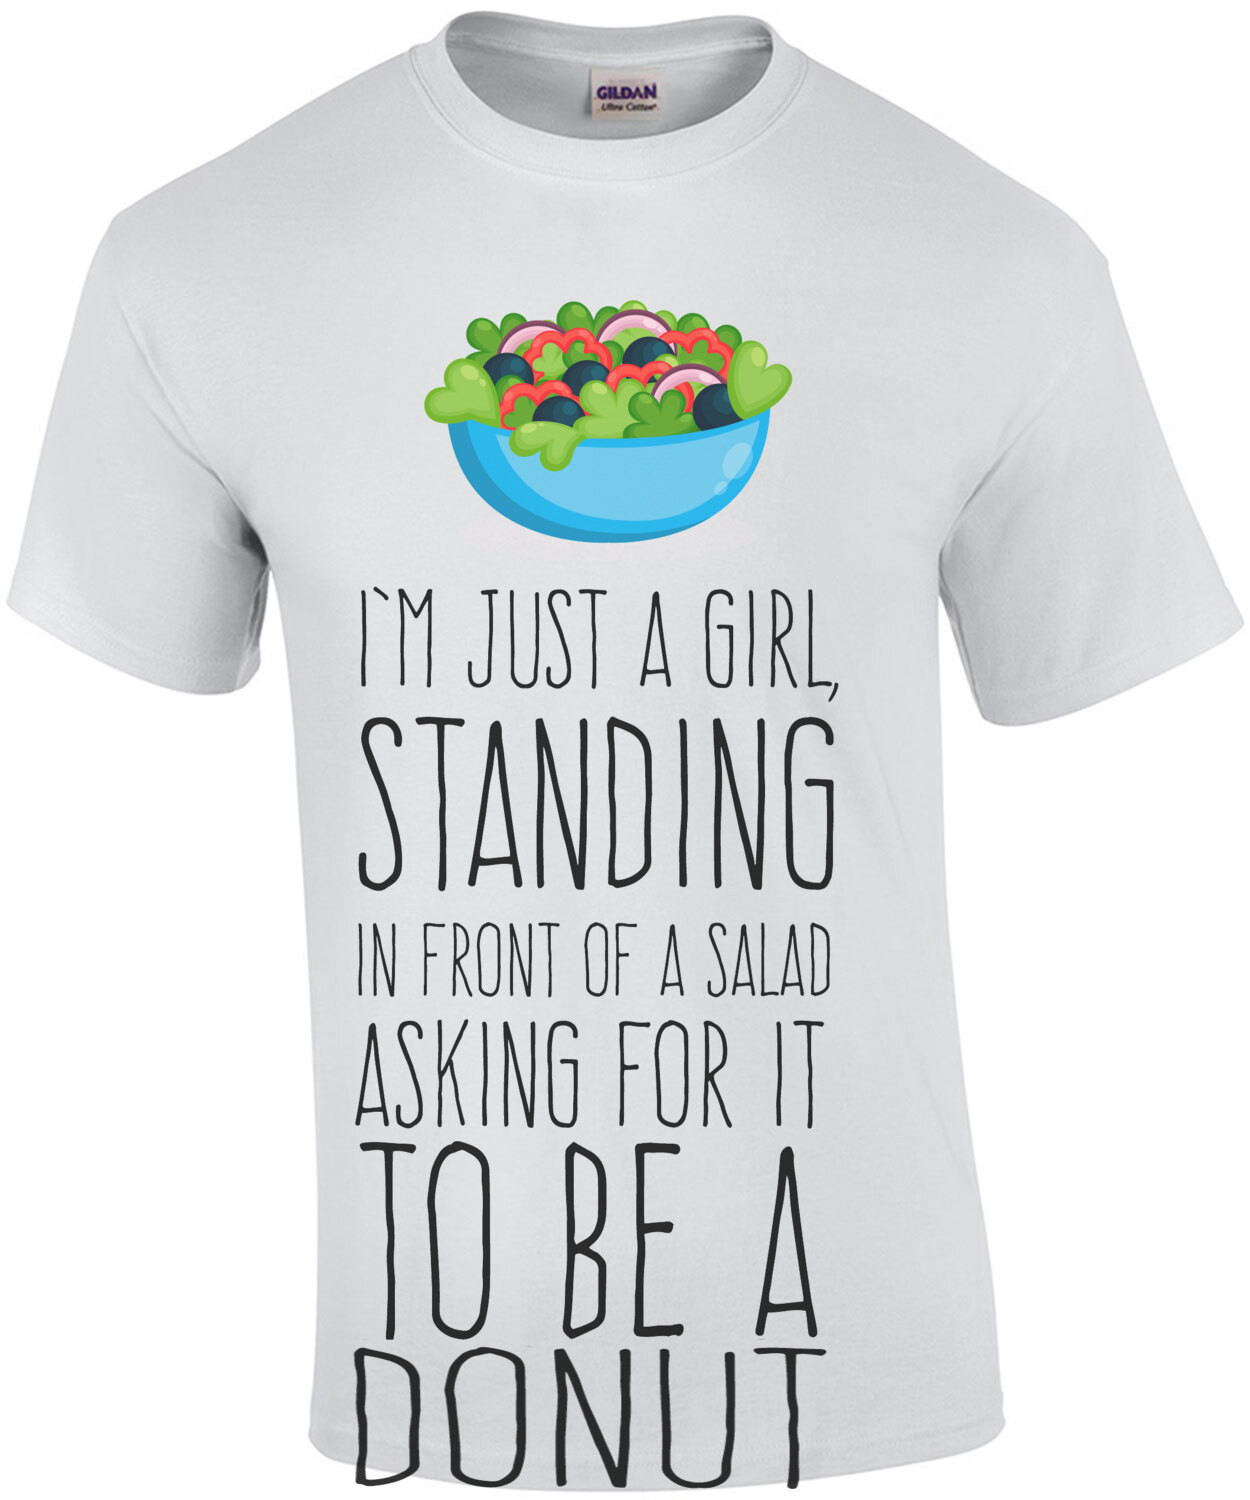 I'm just a girl standing in front of a salad asking for it to be a donut. Funny Ladies t-shirt